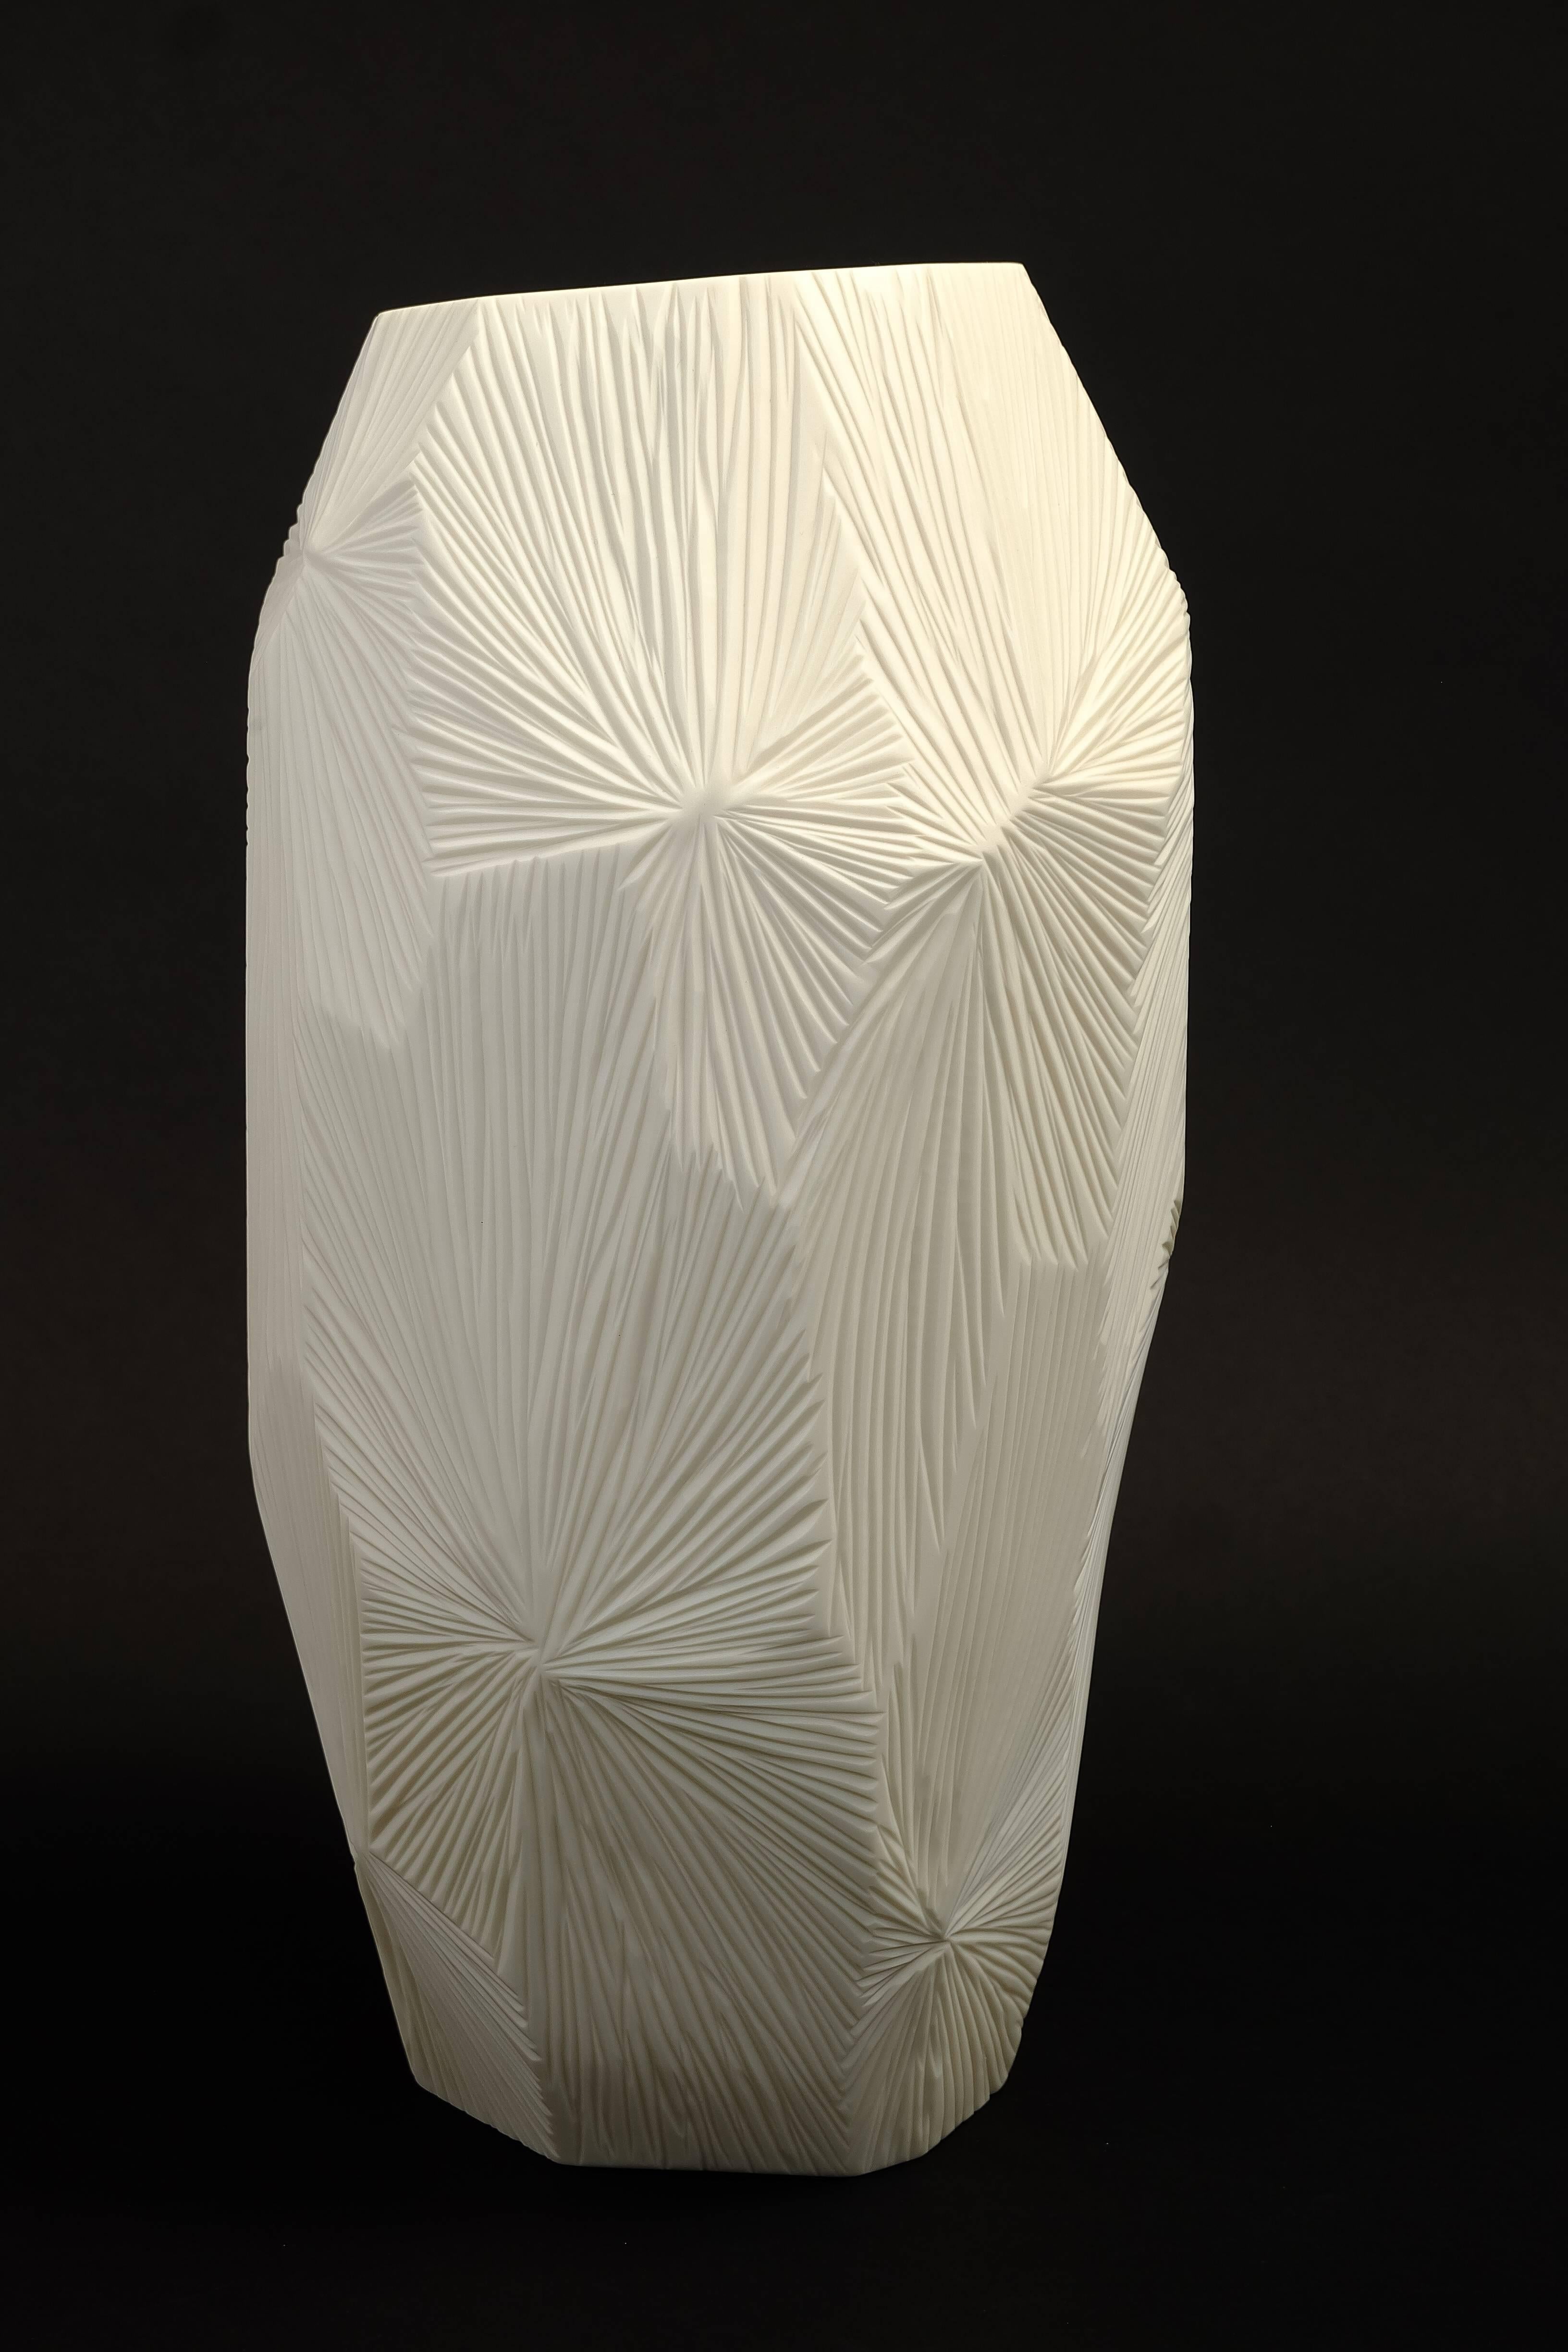 Large Vase from the Fragments series - Art by Vezzini & Chen